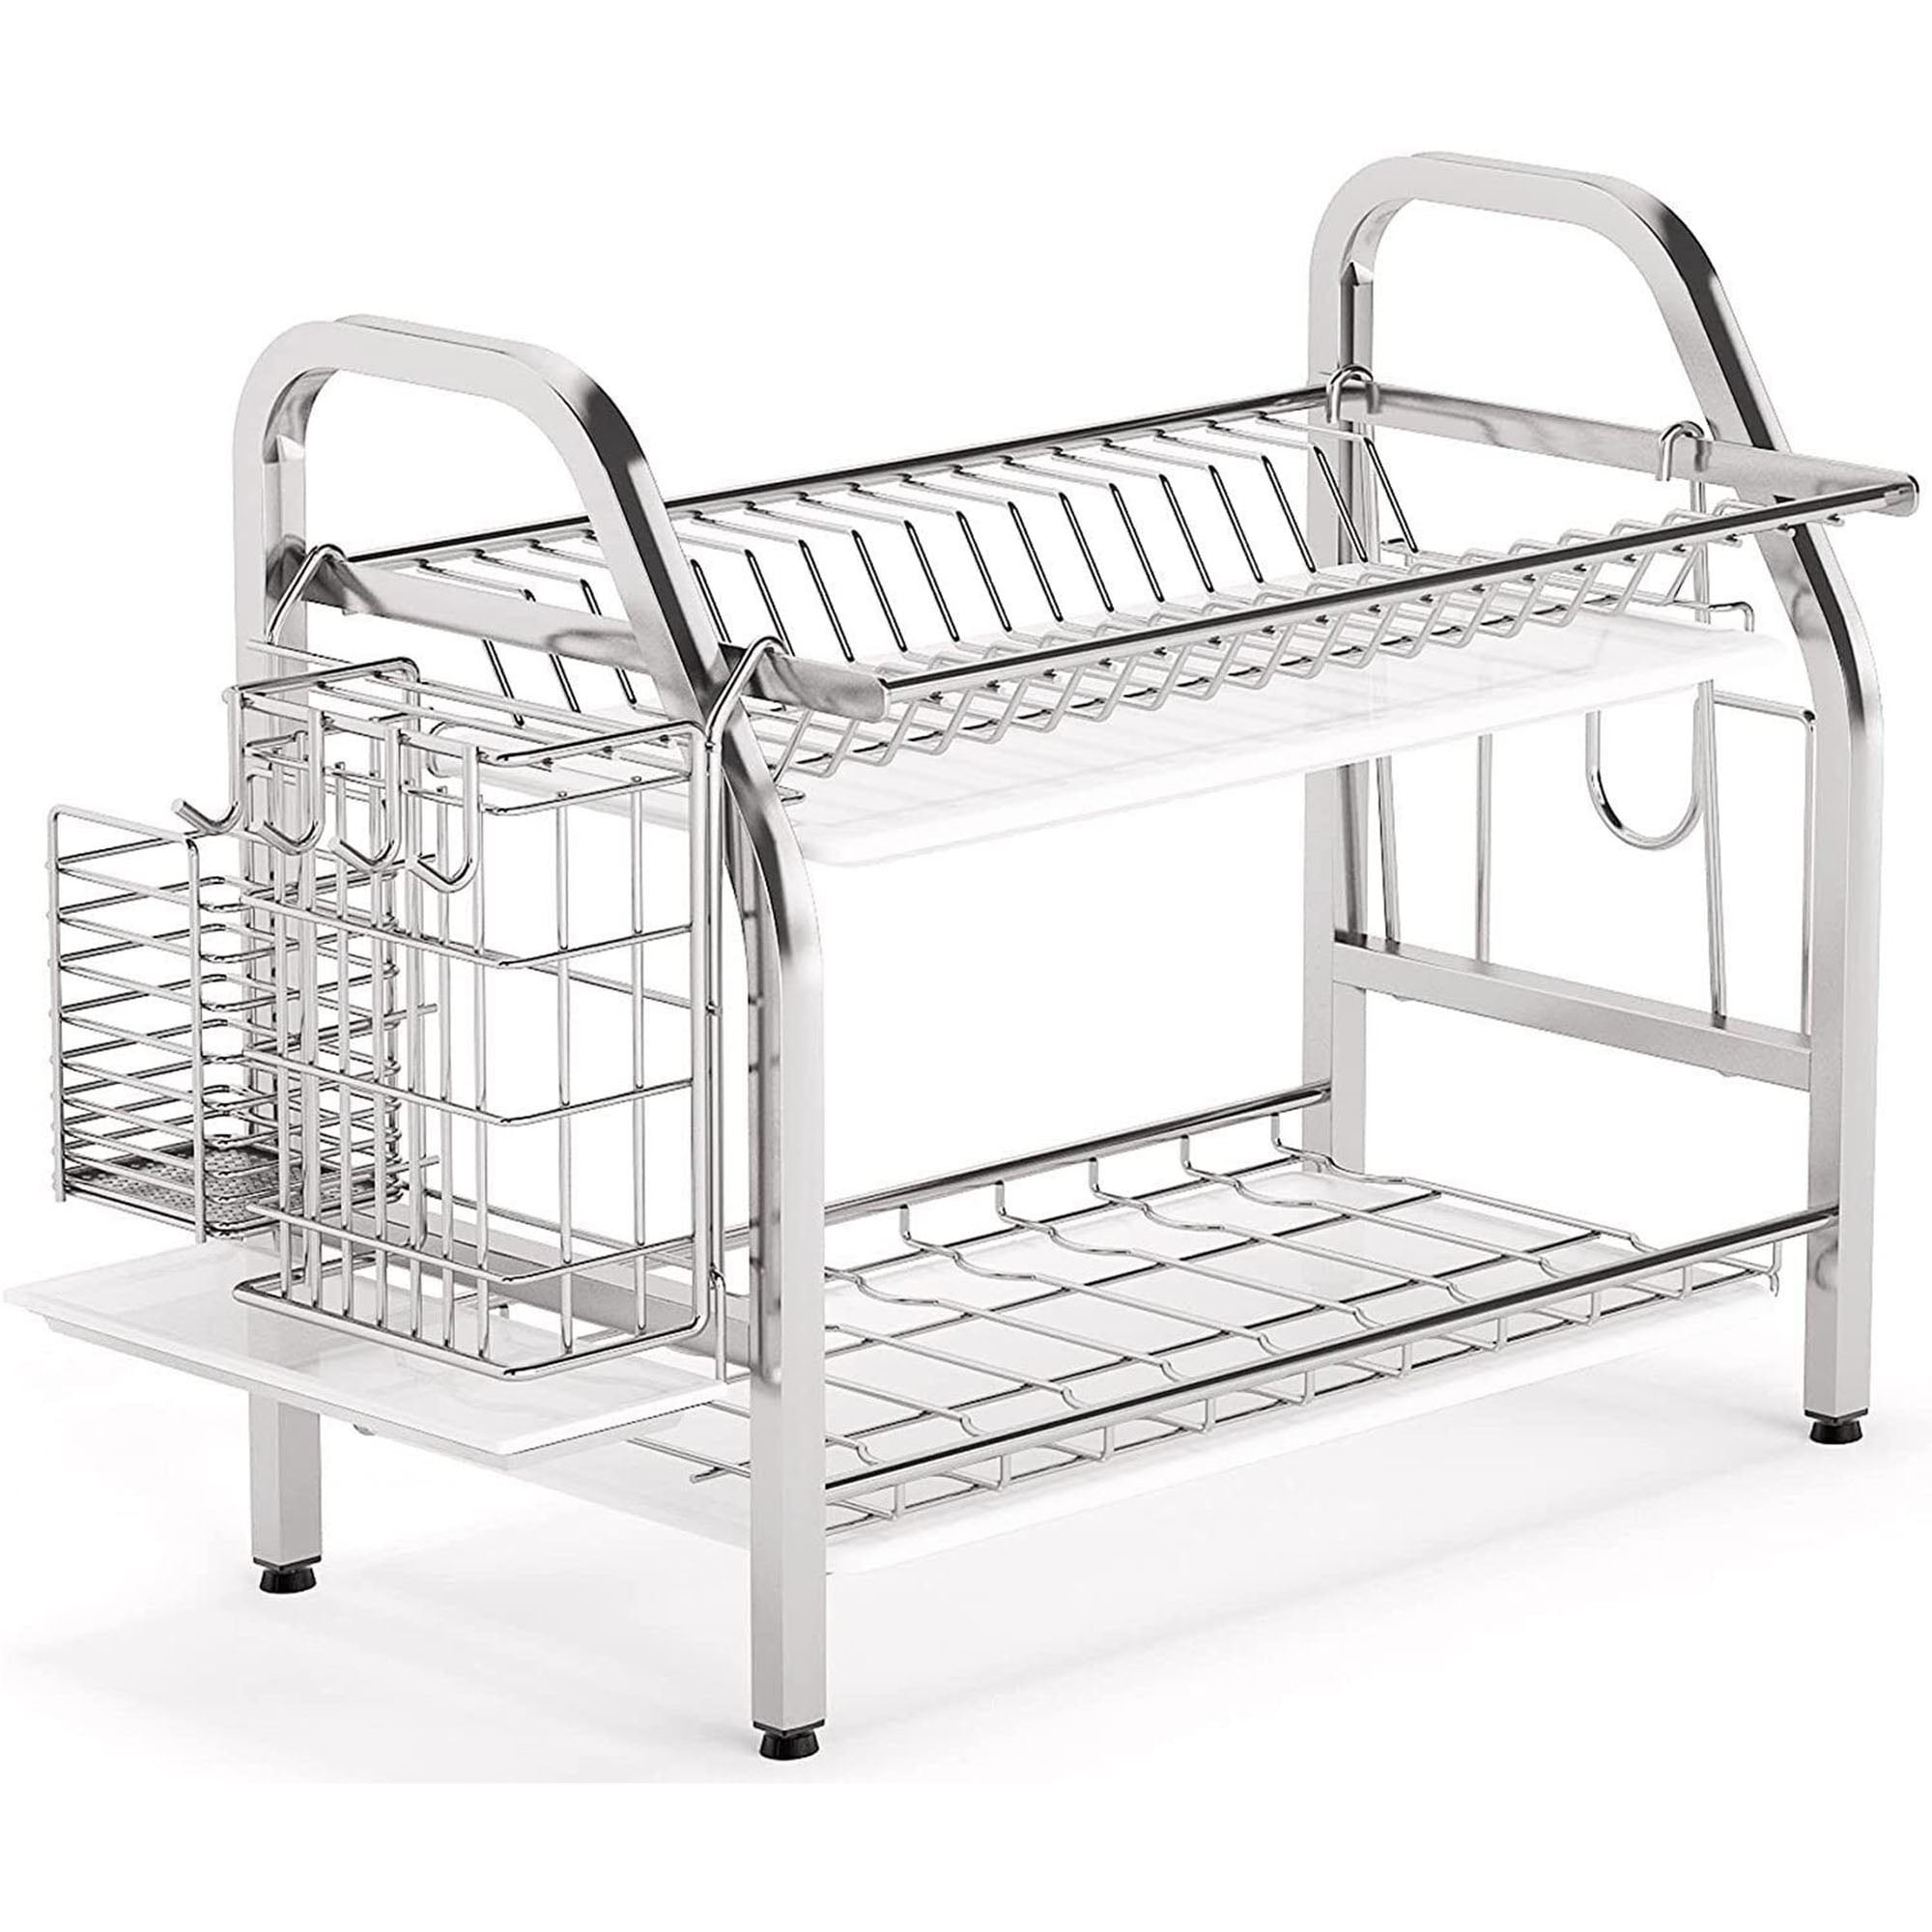 Dropship Dish Drying Rack Stainless Steel Dish Rack W/ Drainboard Cutlery Holder  Kitchen Dish Organizer to Sell Online at a Lower Price